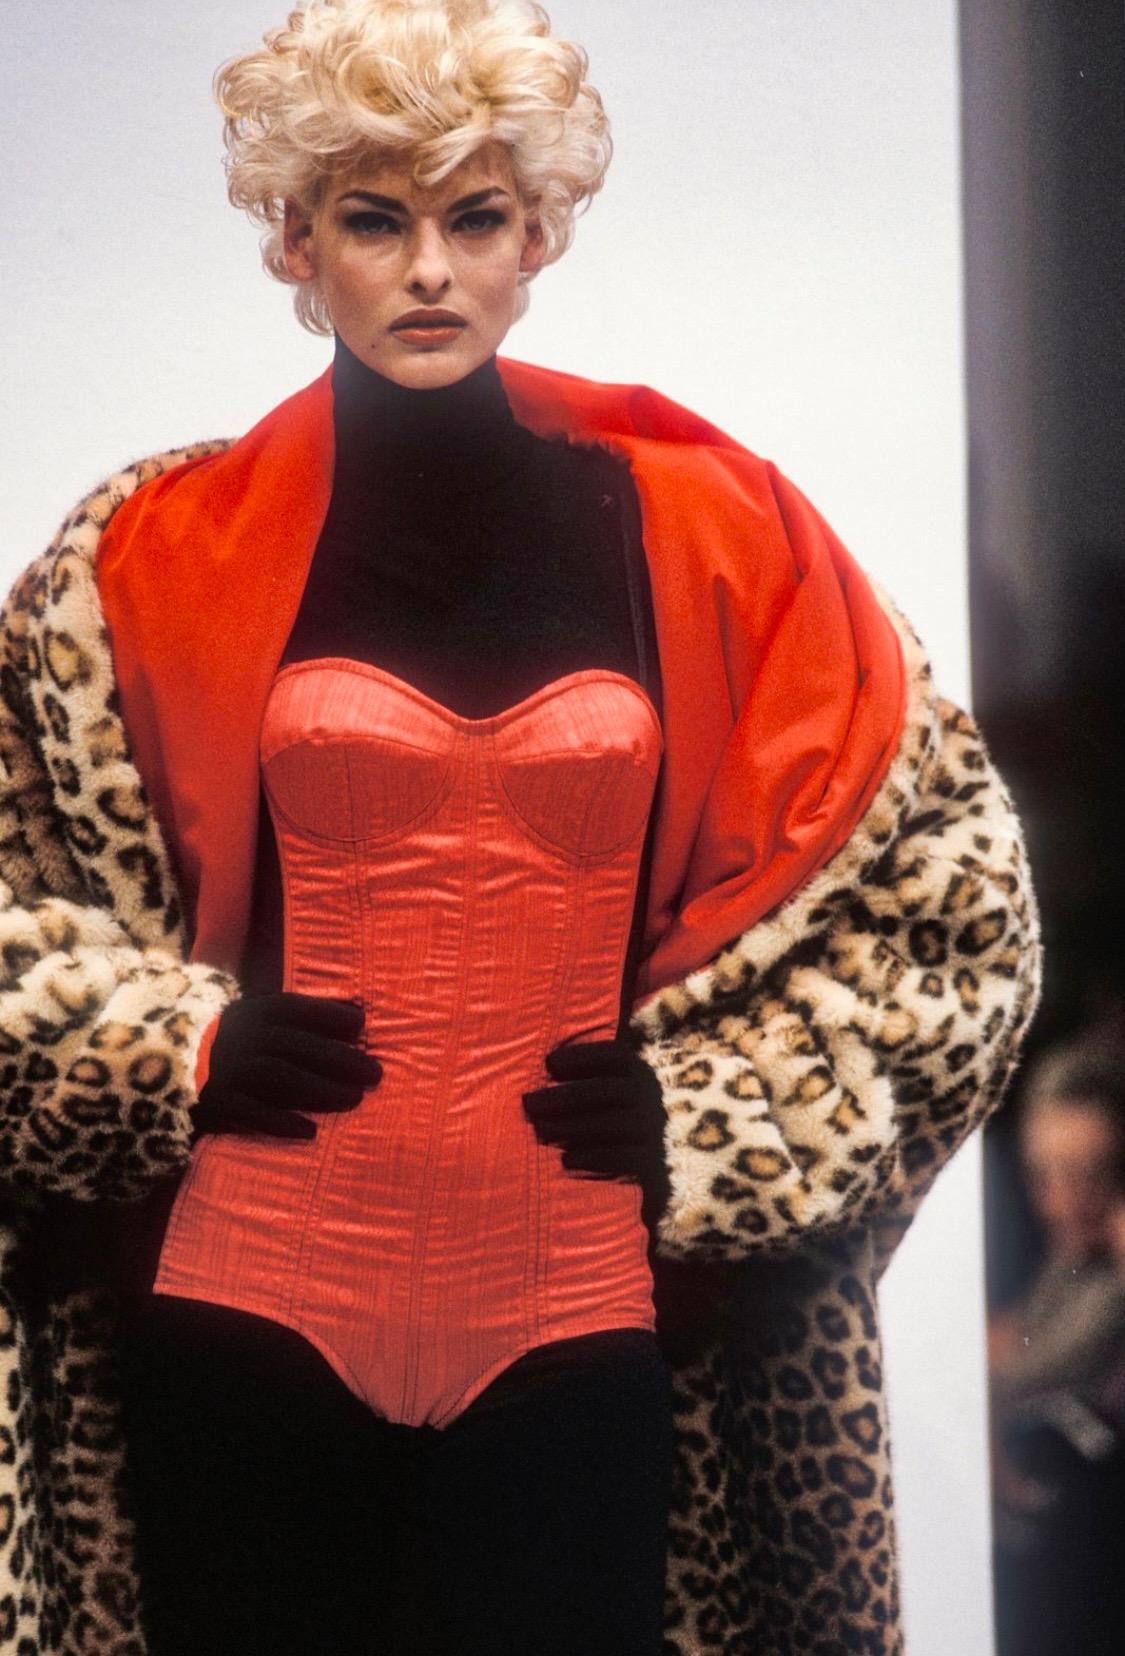 F/W 1991 Dolce & Gabbana Runway Leopard Print Faux Fur Red Shawl Oversized Coat In Good Condition For Sale In West Hollywood, CA